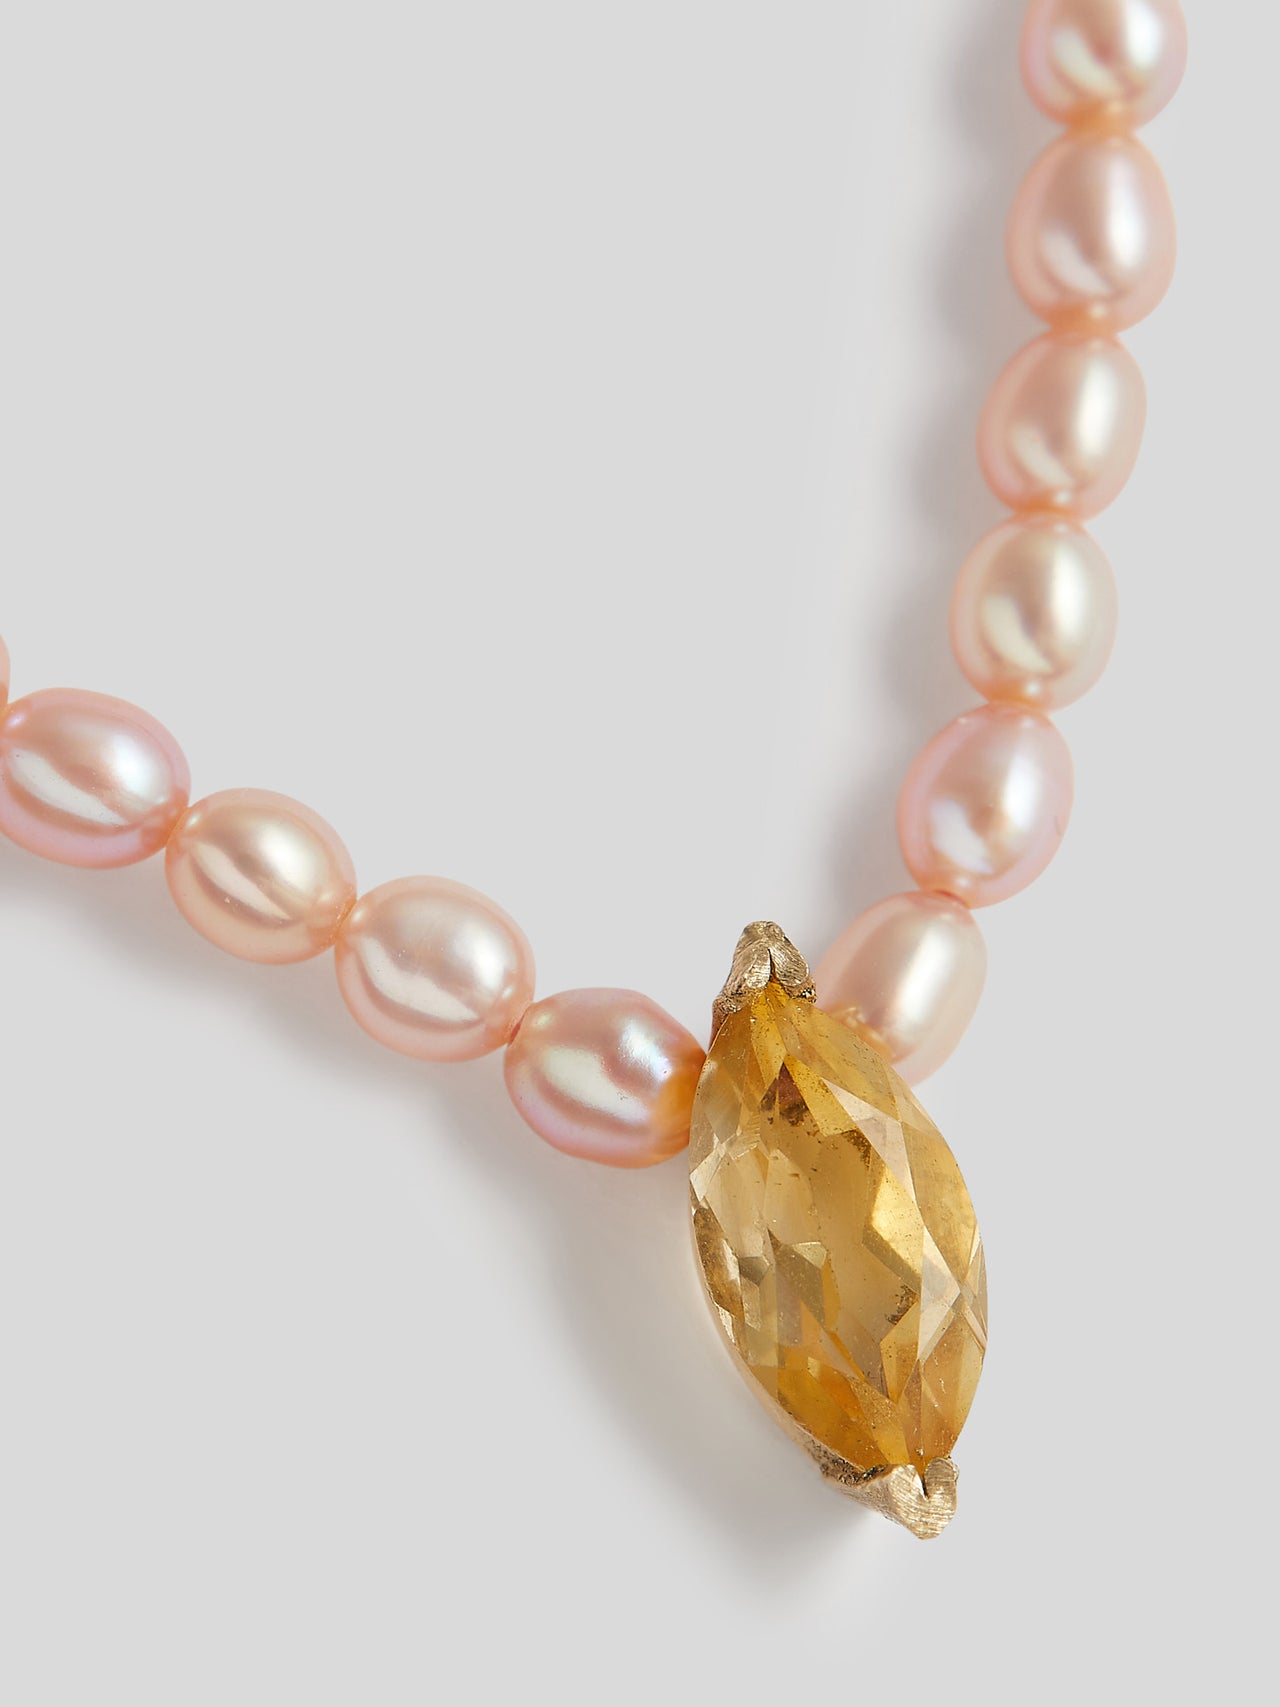 14kt Yellow Gold Pink Pearl Necklace close up of Citrine faceted stone setting. 